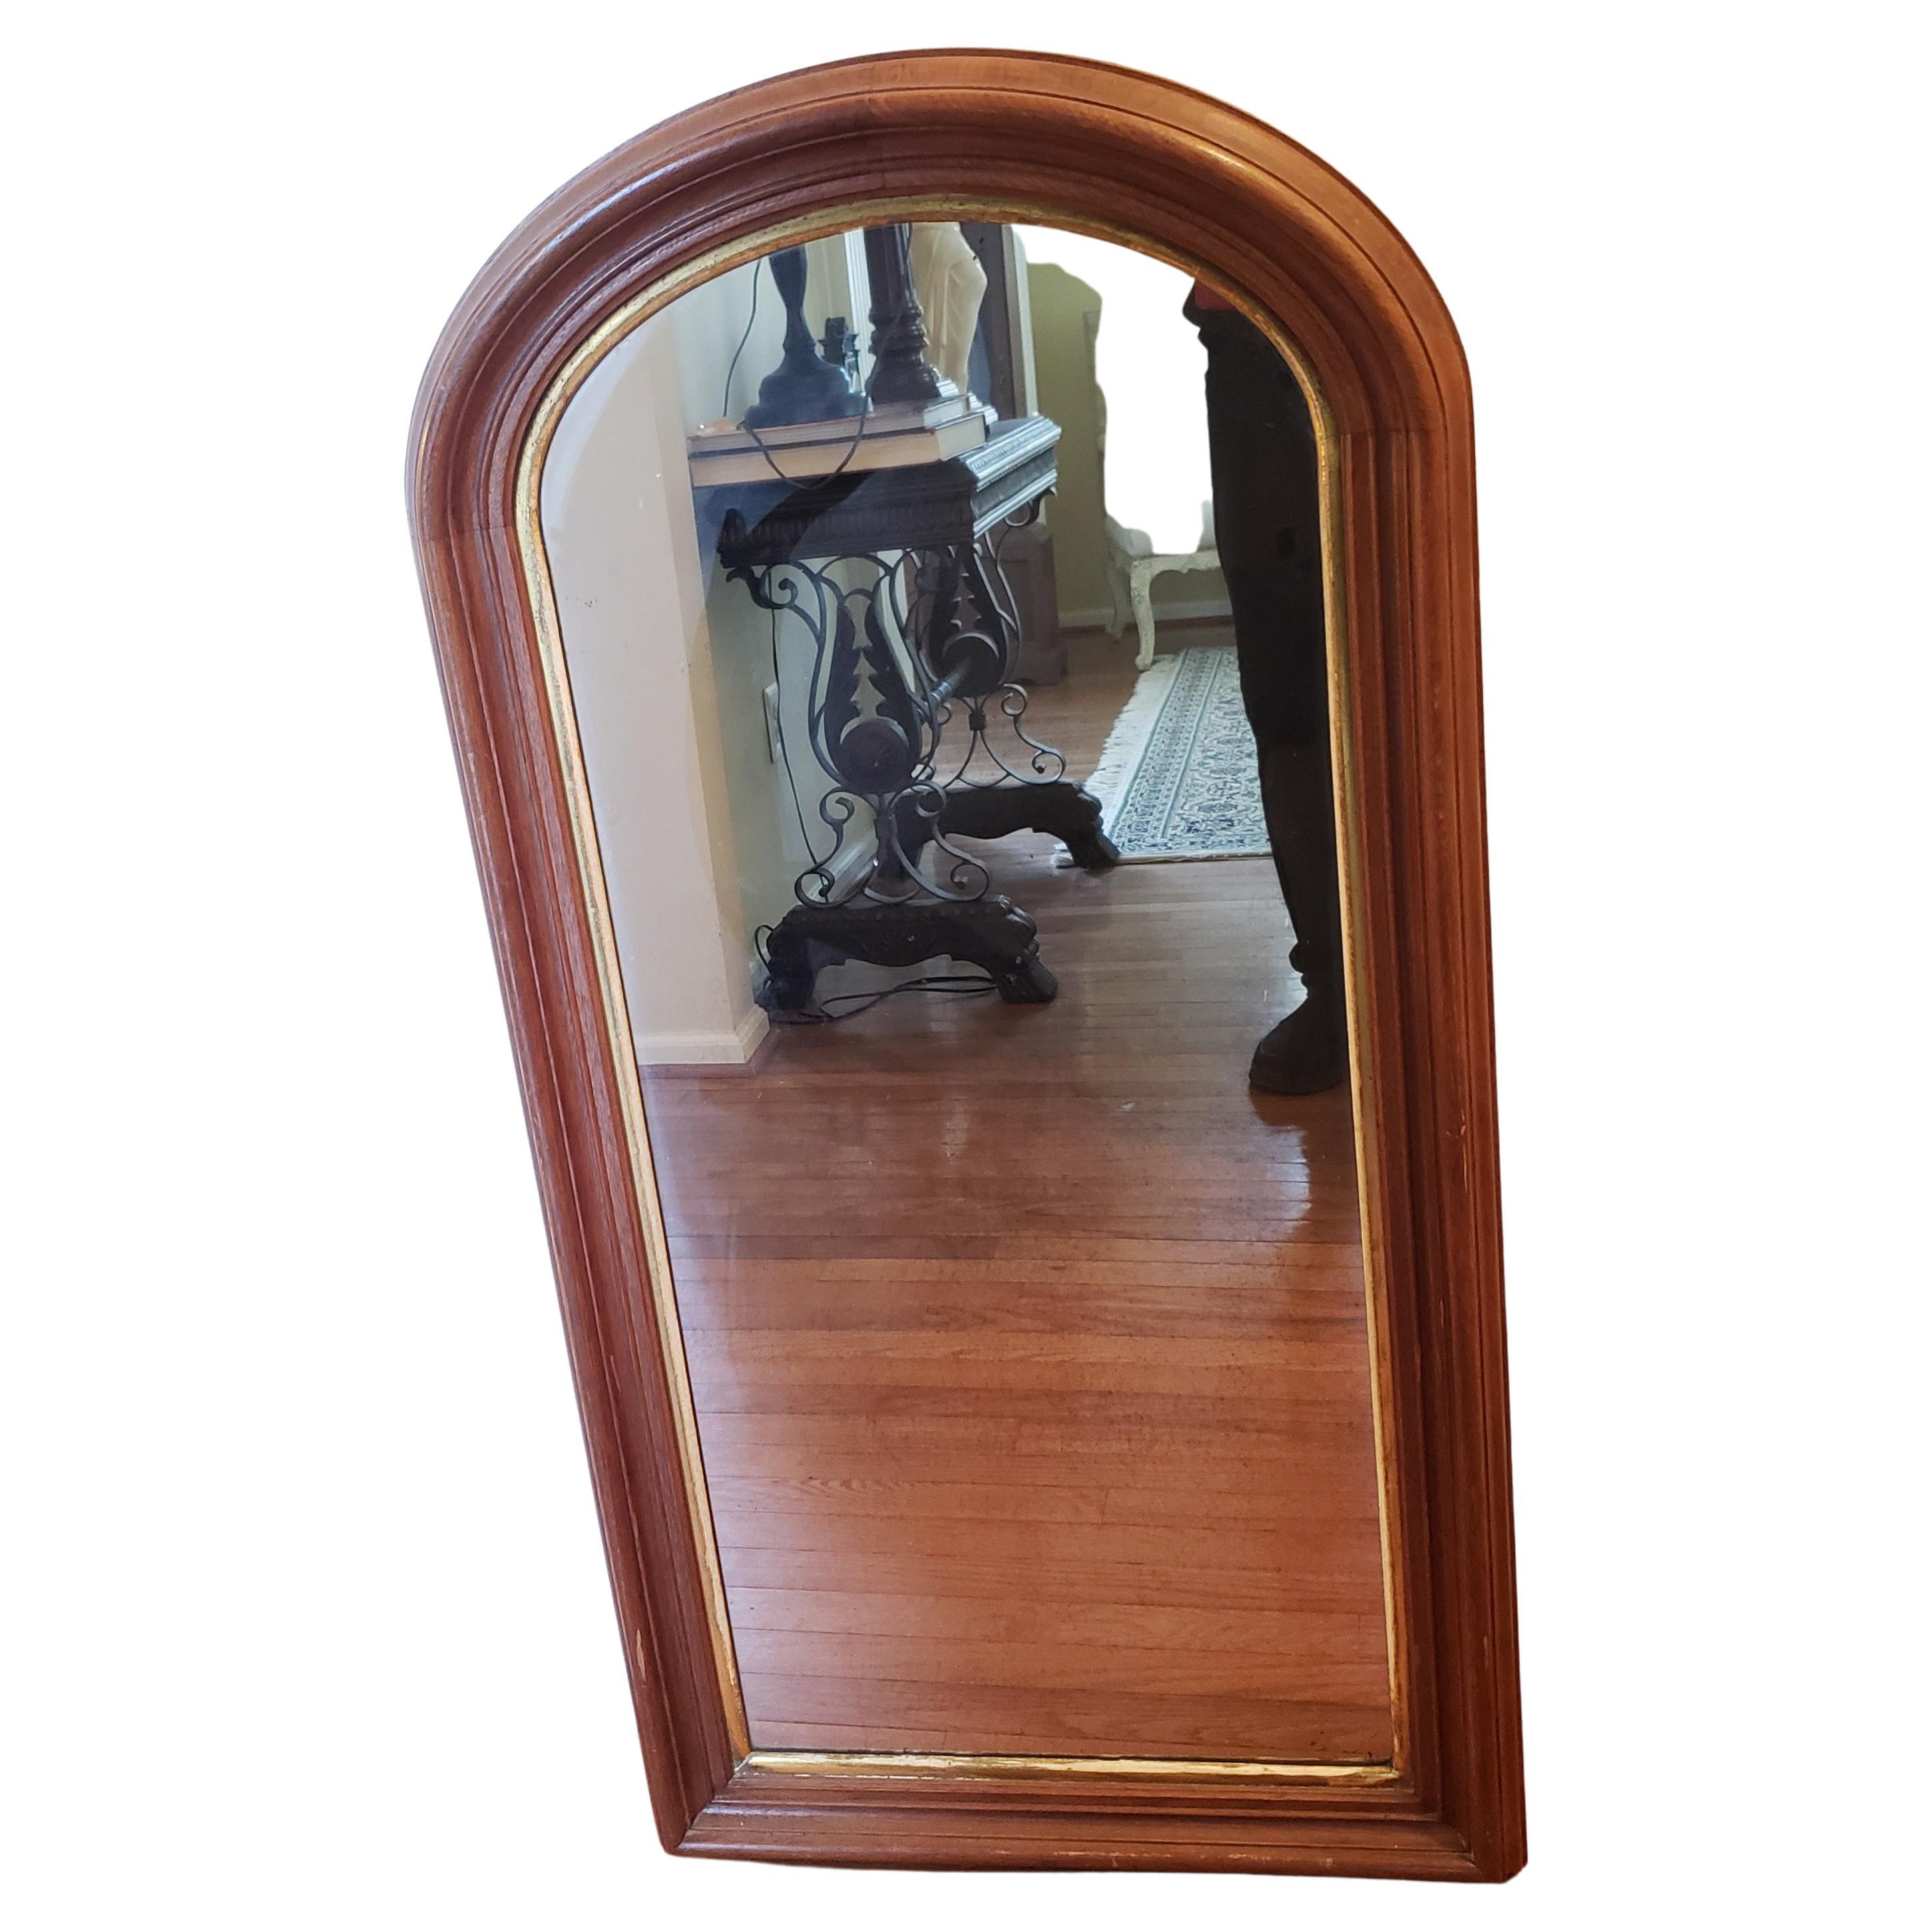 Gorgeous 19th century Louis Philippe wall mirror. Thick mahogany frame with interior giltwood trim. Mirror glass shows signs of wear and interior spots related to age. Hard Original back board protect the original mirror glass. Very good antique